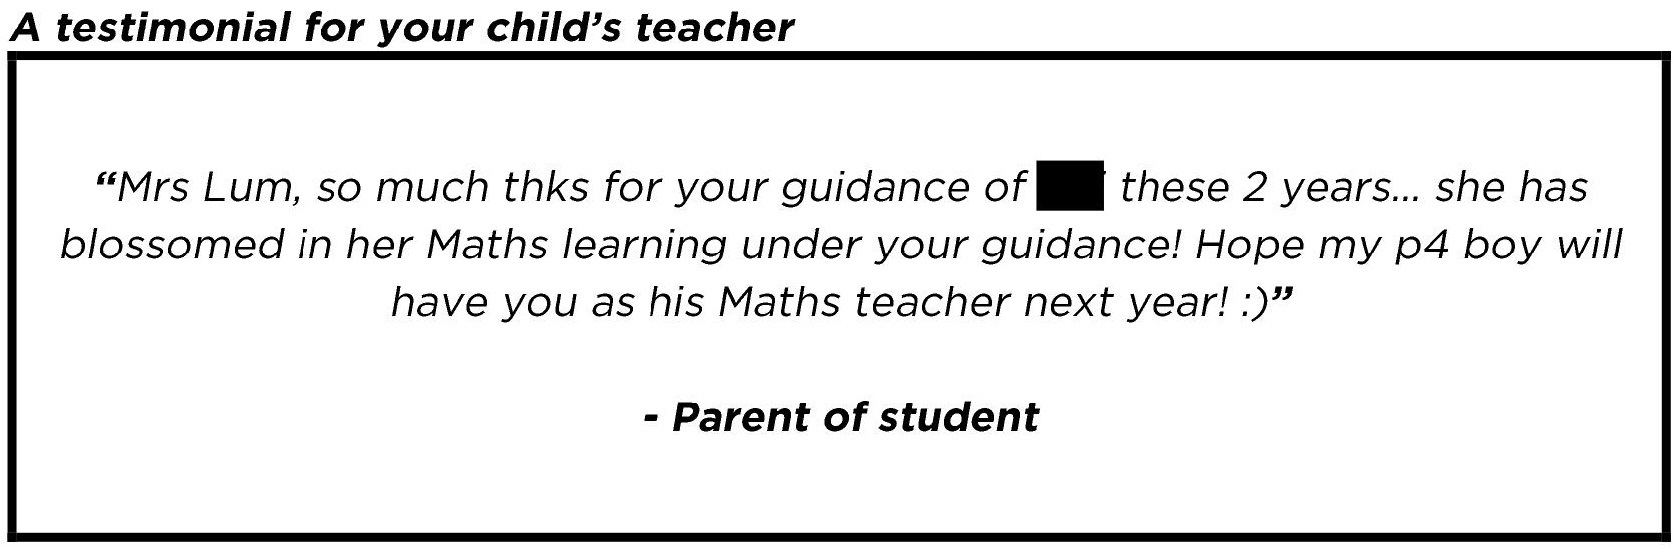 "She has blossomed in her Maths learning under your guidance!"